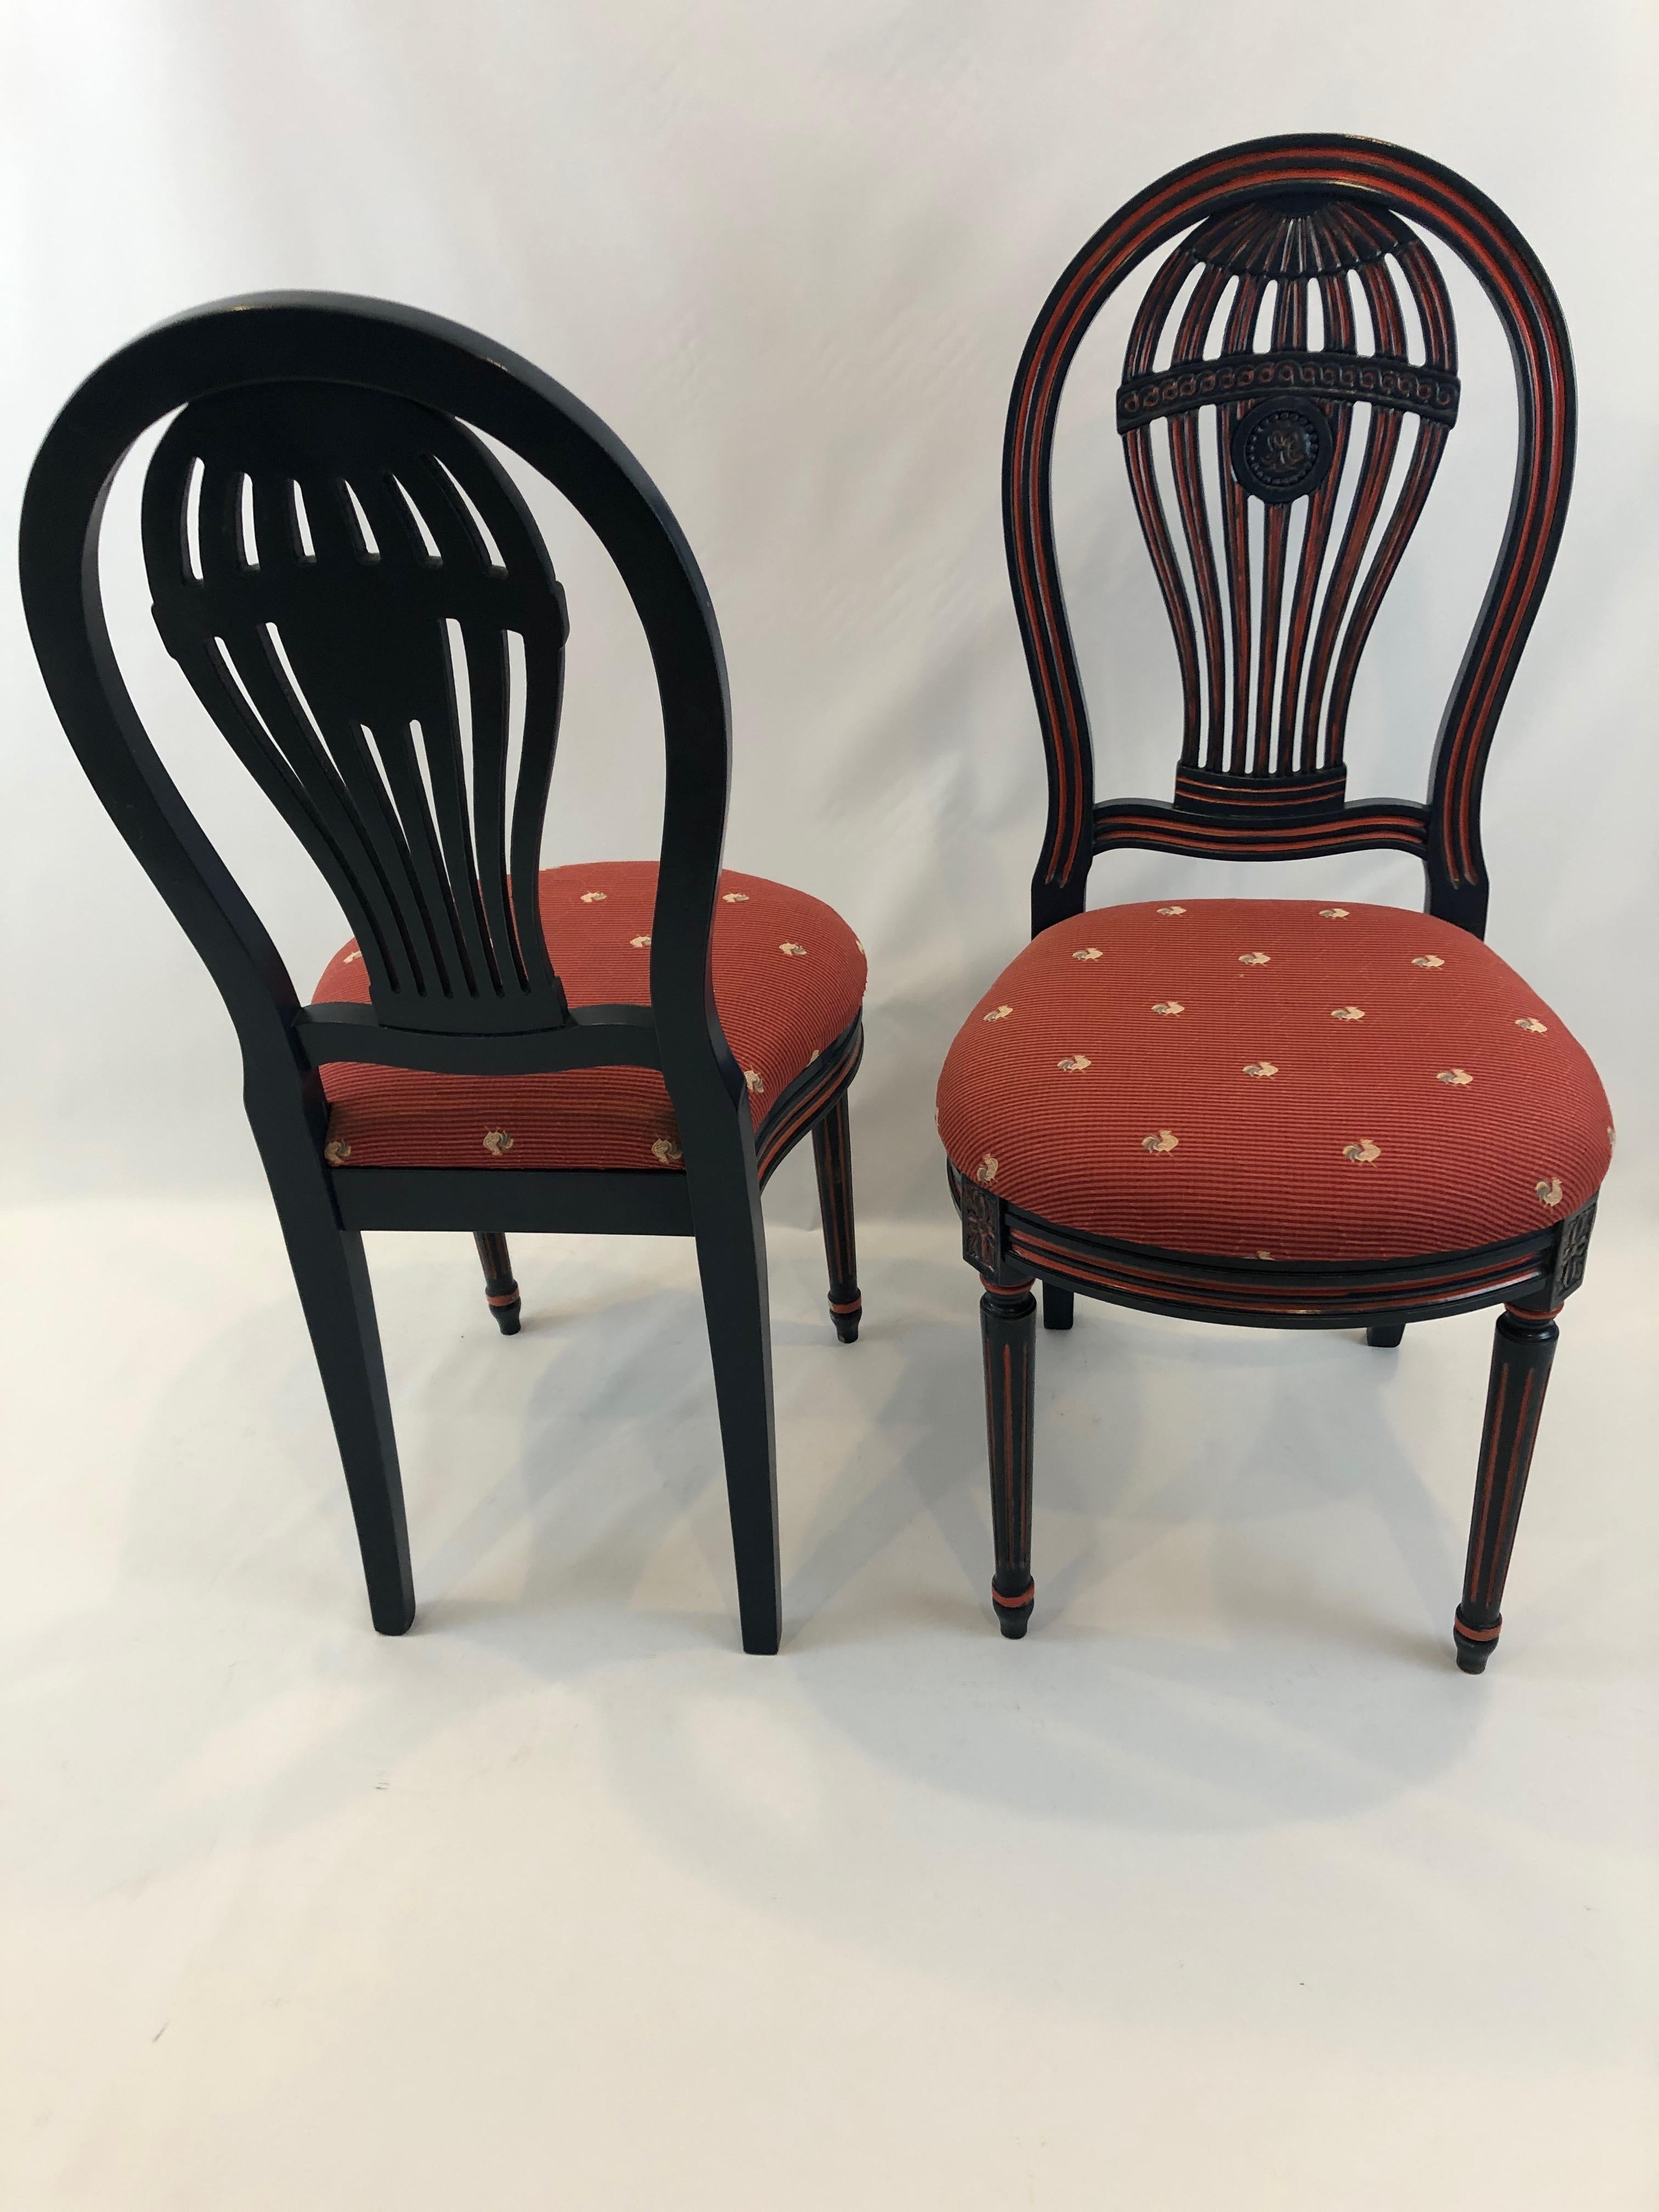 Charming Pair of French Balloon Back Carved Wood and Painted Side Chairs 1